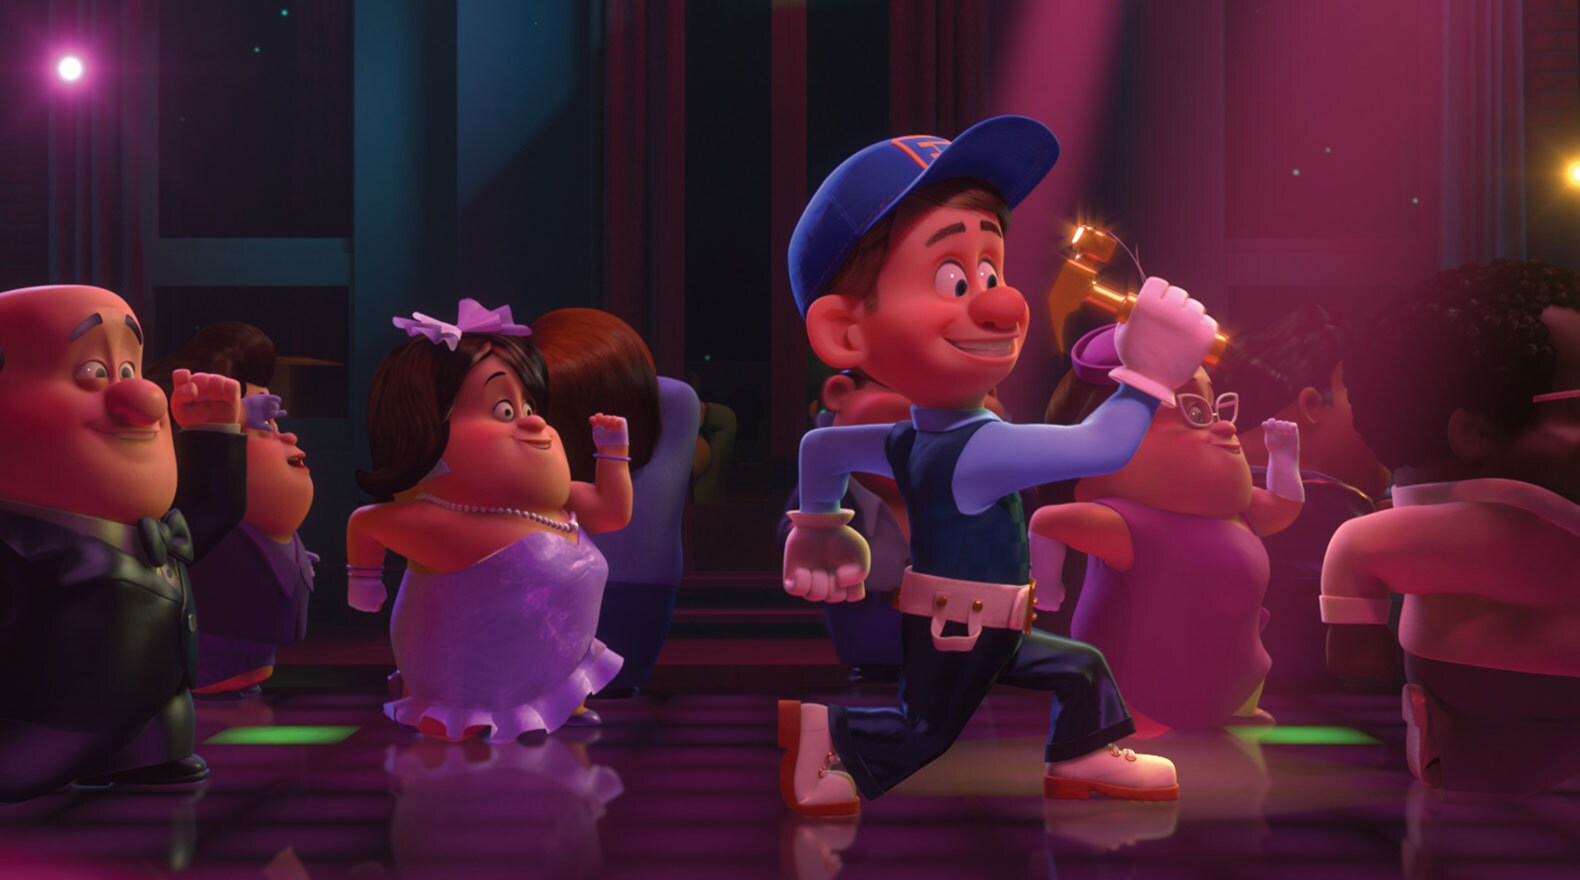 Fix-it Felix played by Jack McBrayer on the dance floor with some others in "Wreck-It Ralph"